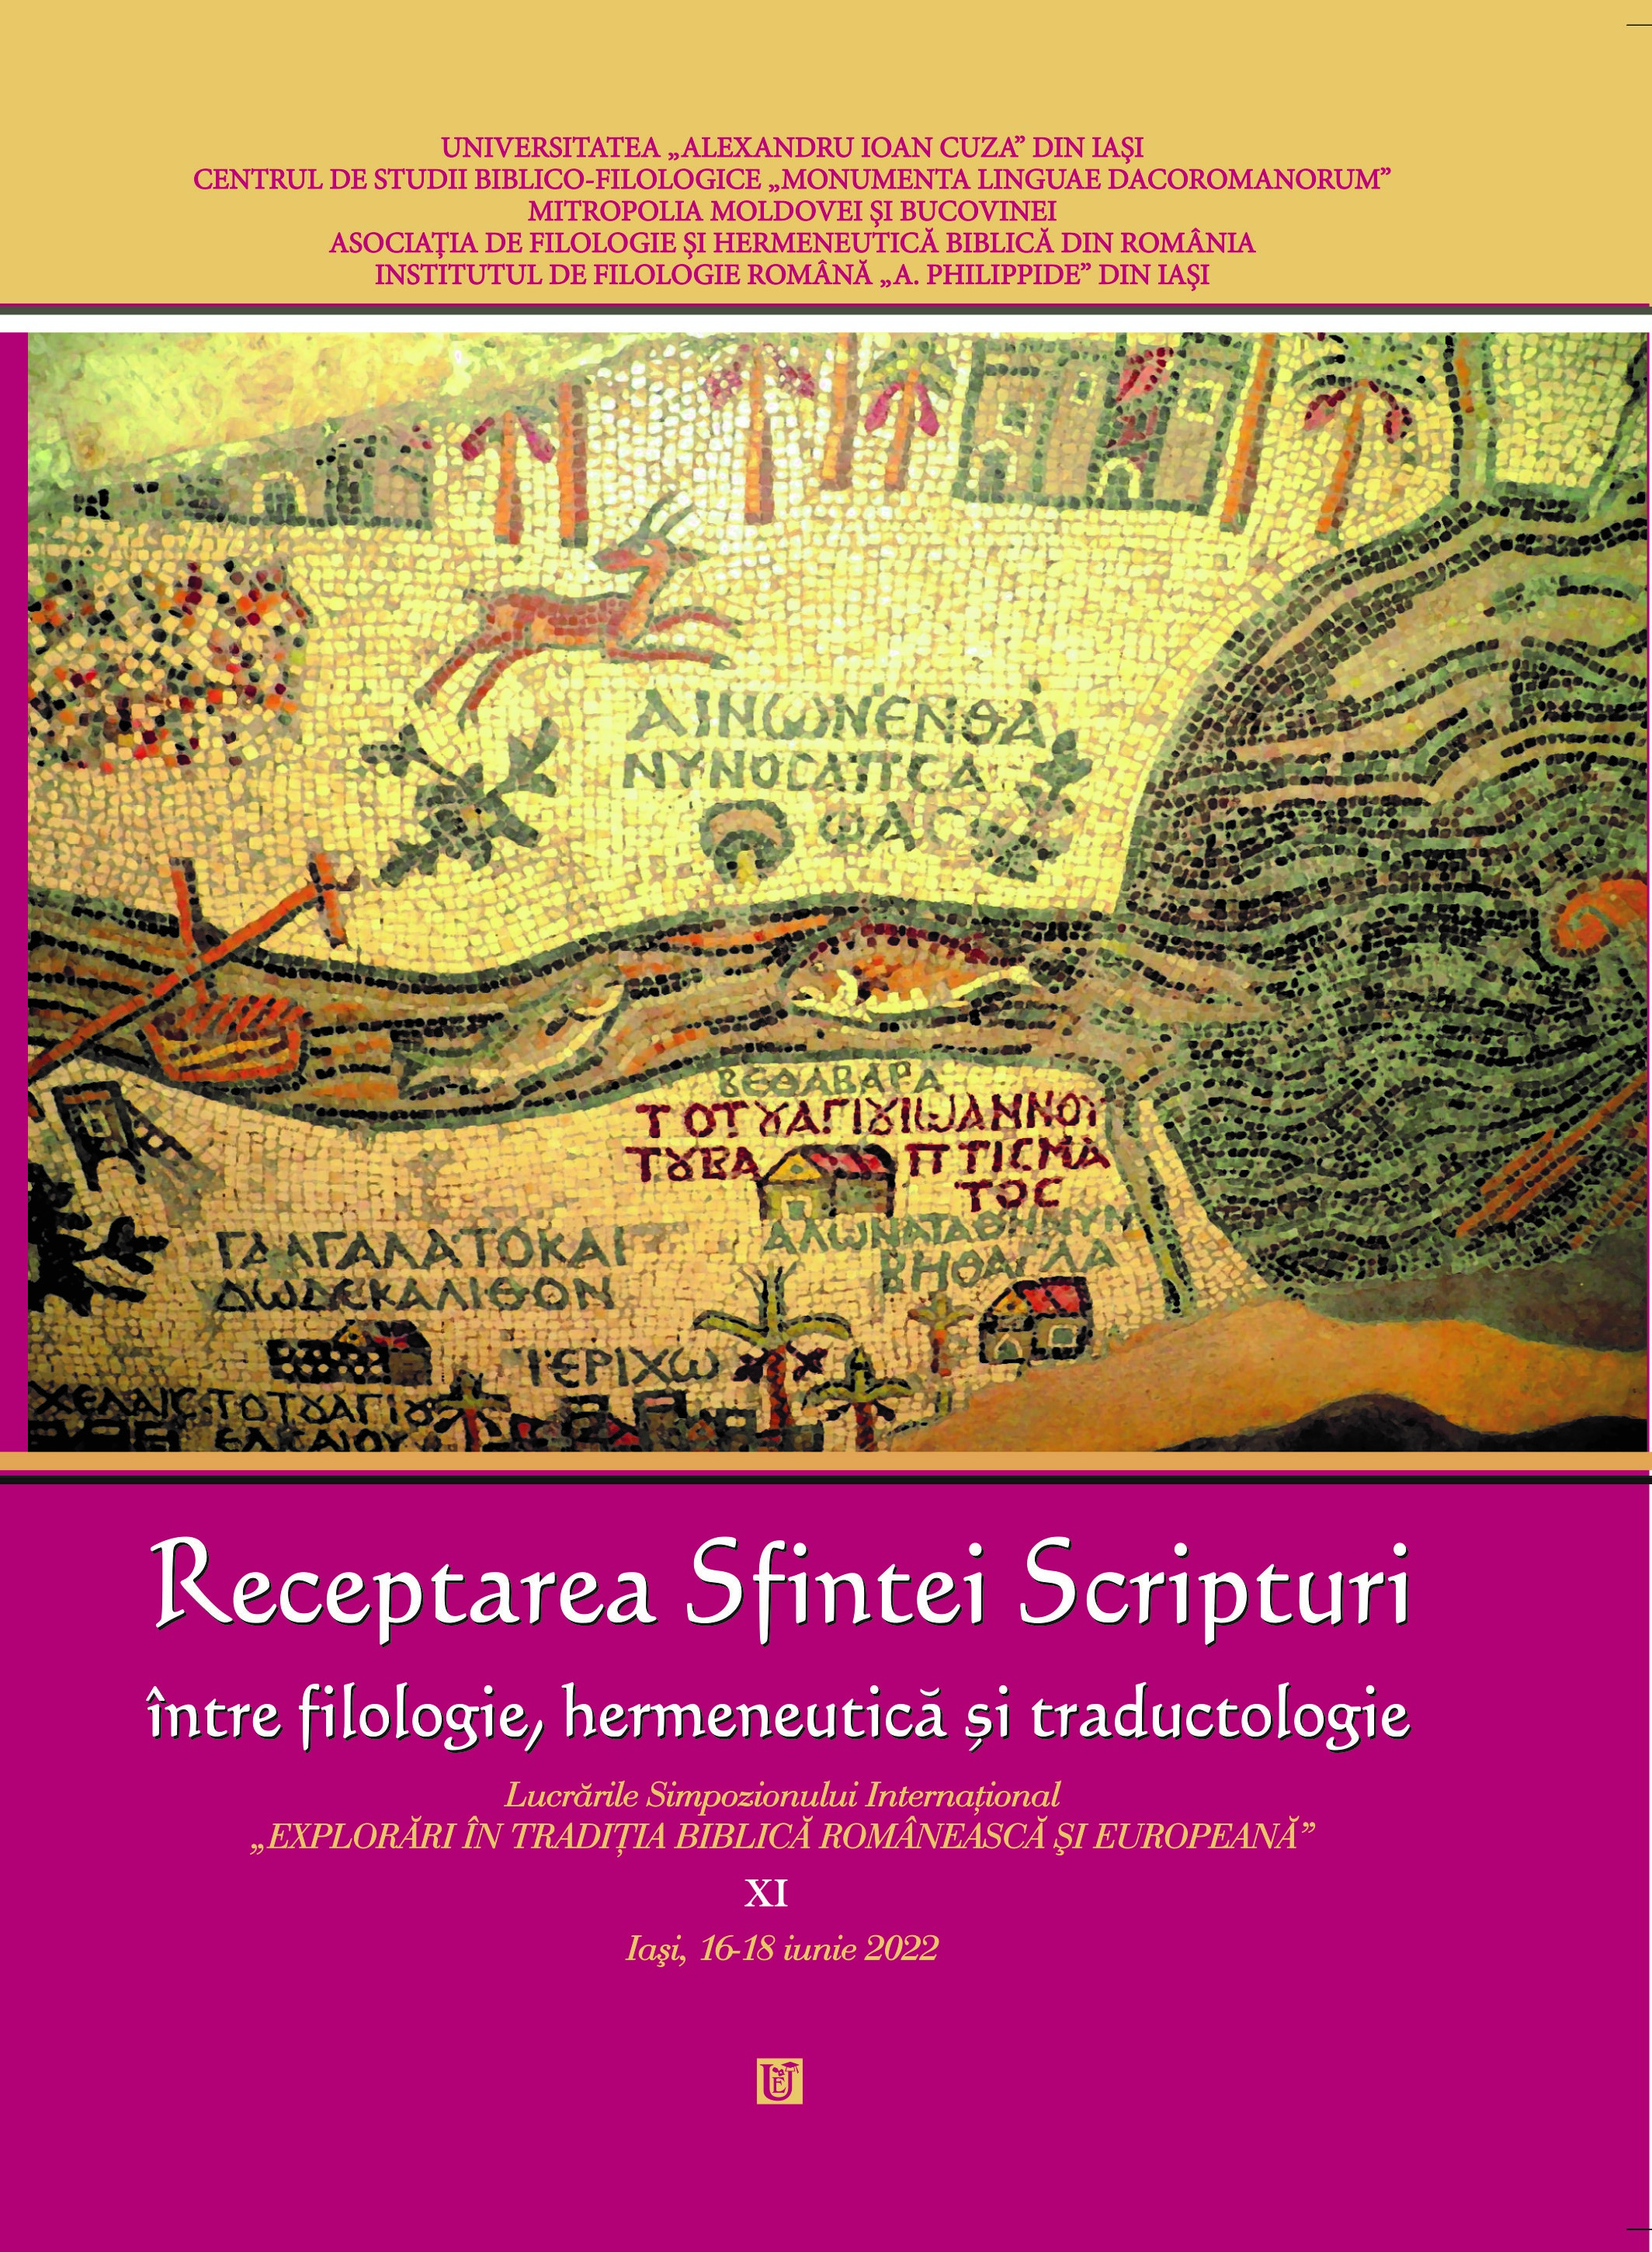 Mental Representations of John 13:31-38: A Discourse Analysis Approach Cover Image